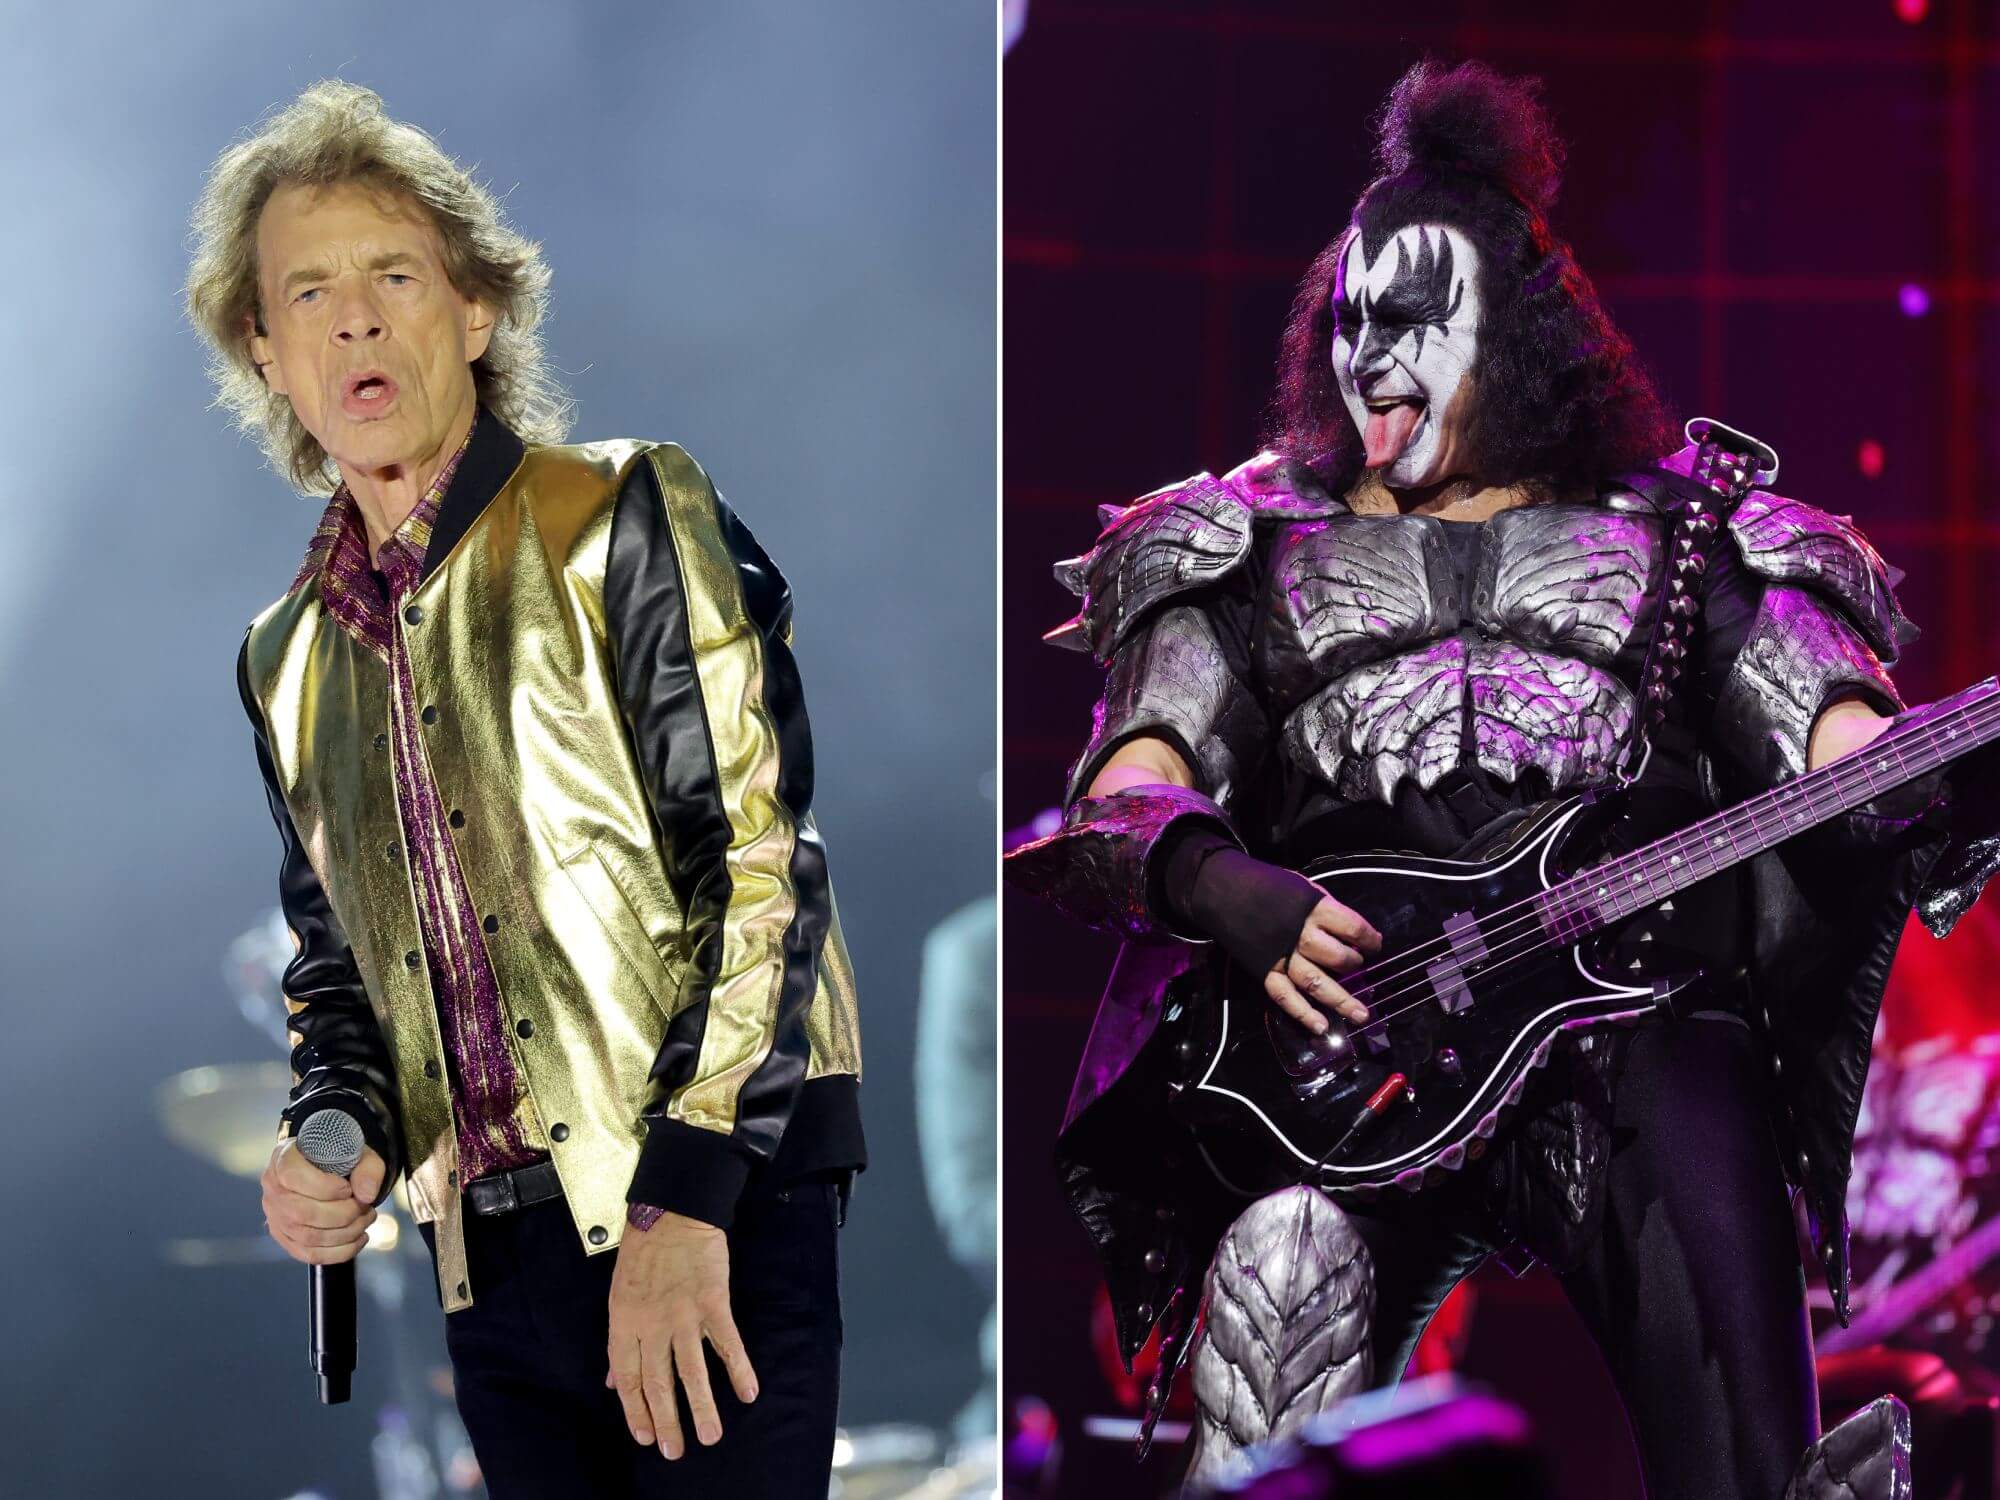 Mick Jagger of The Rolling Stones and Gene Simmons of KISS